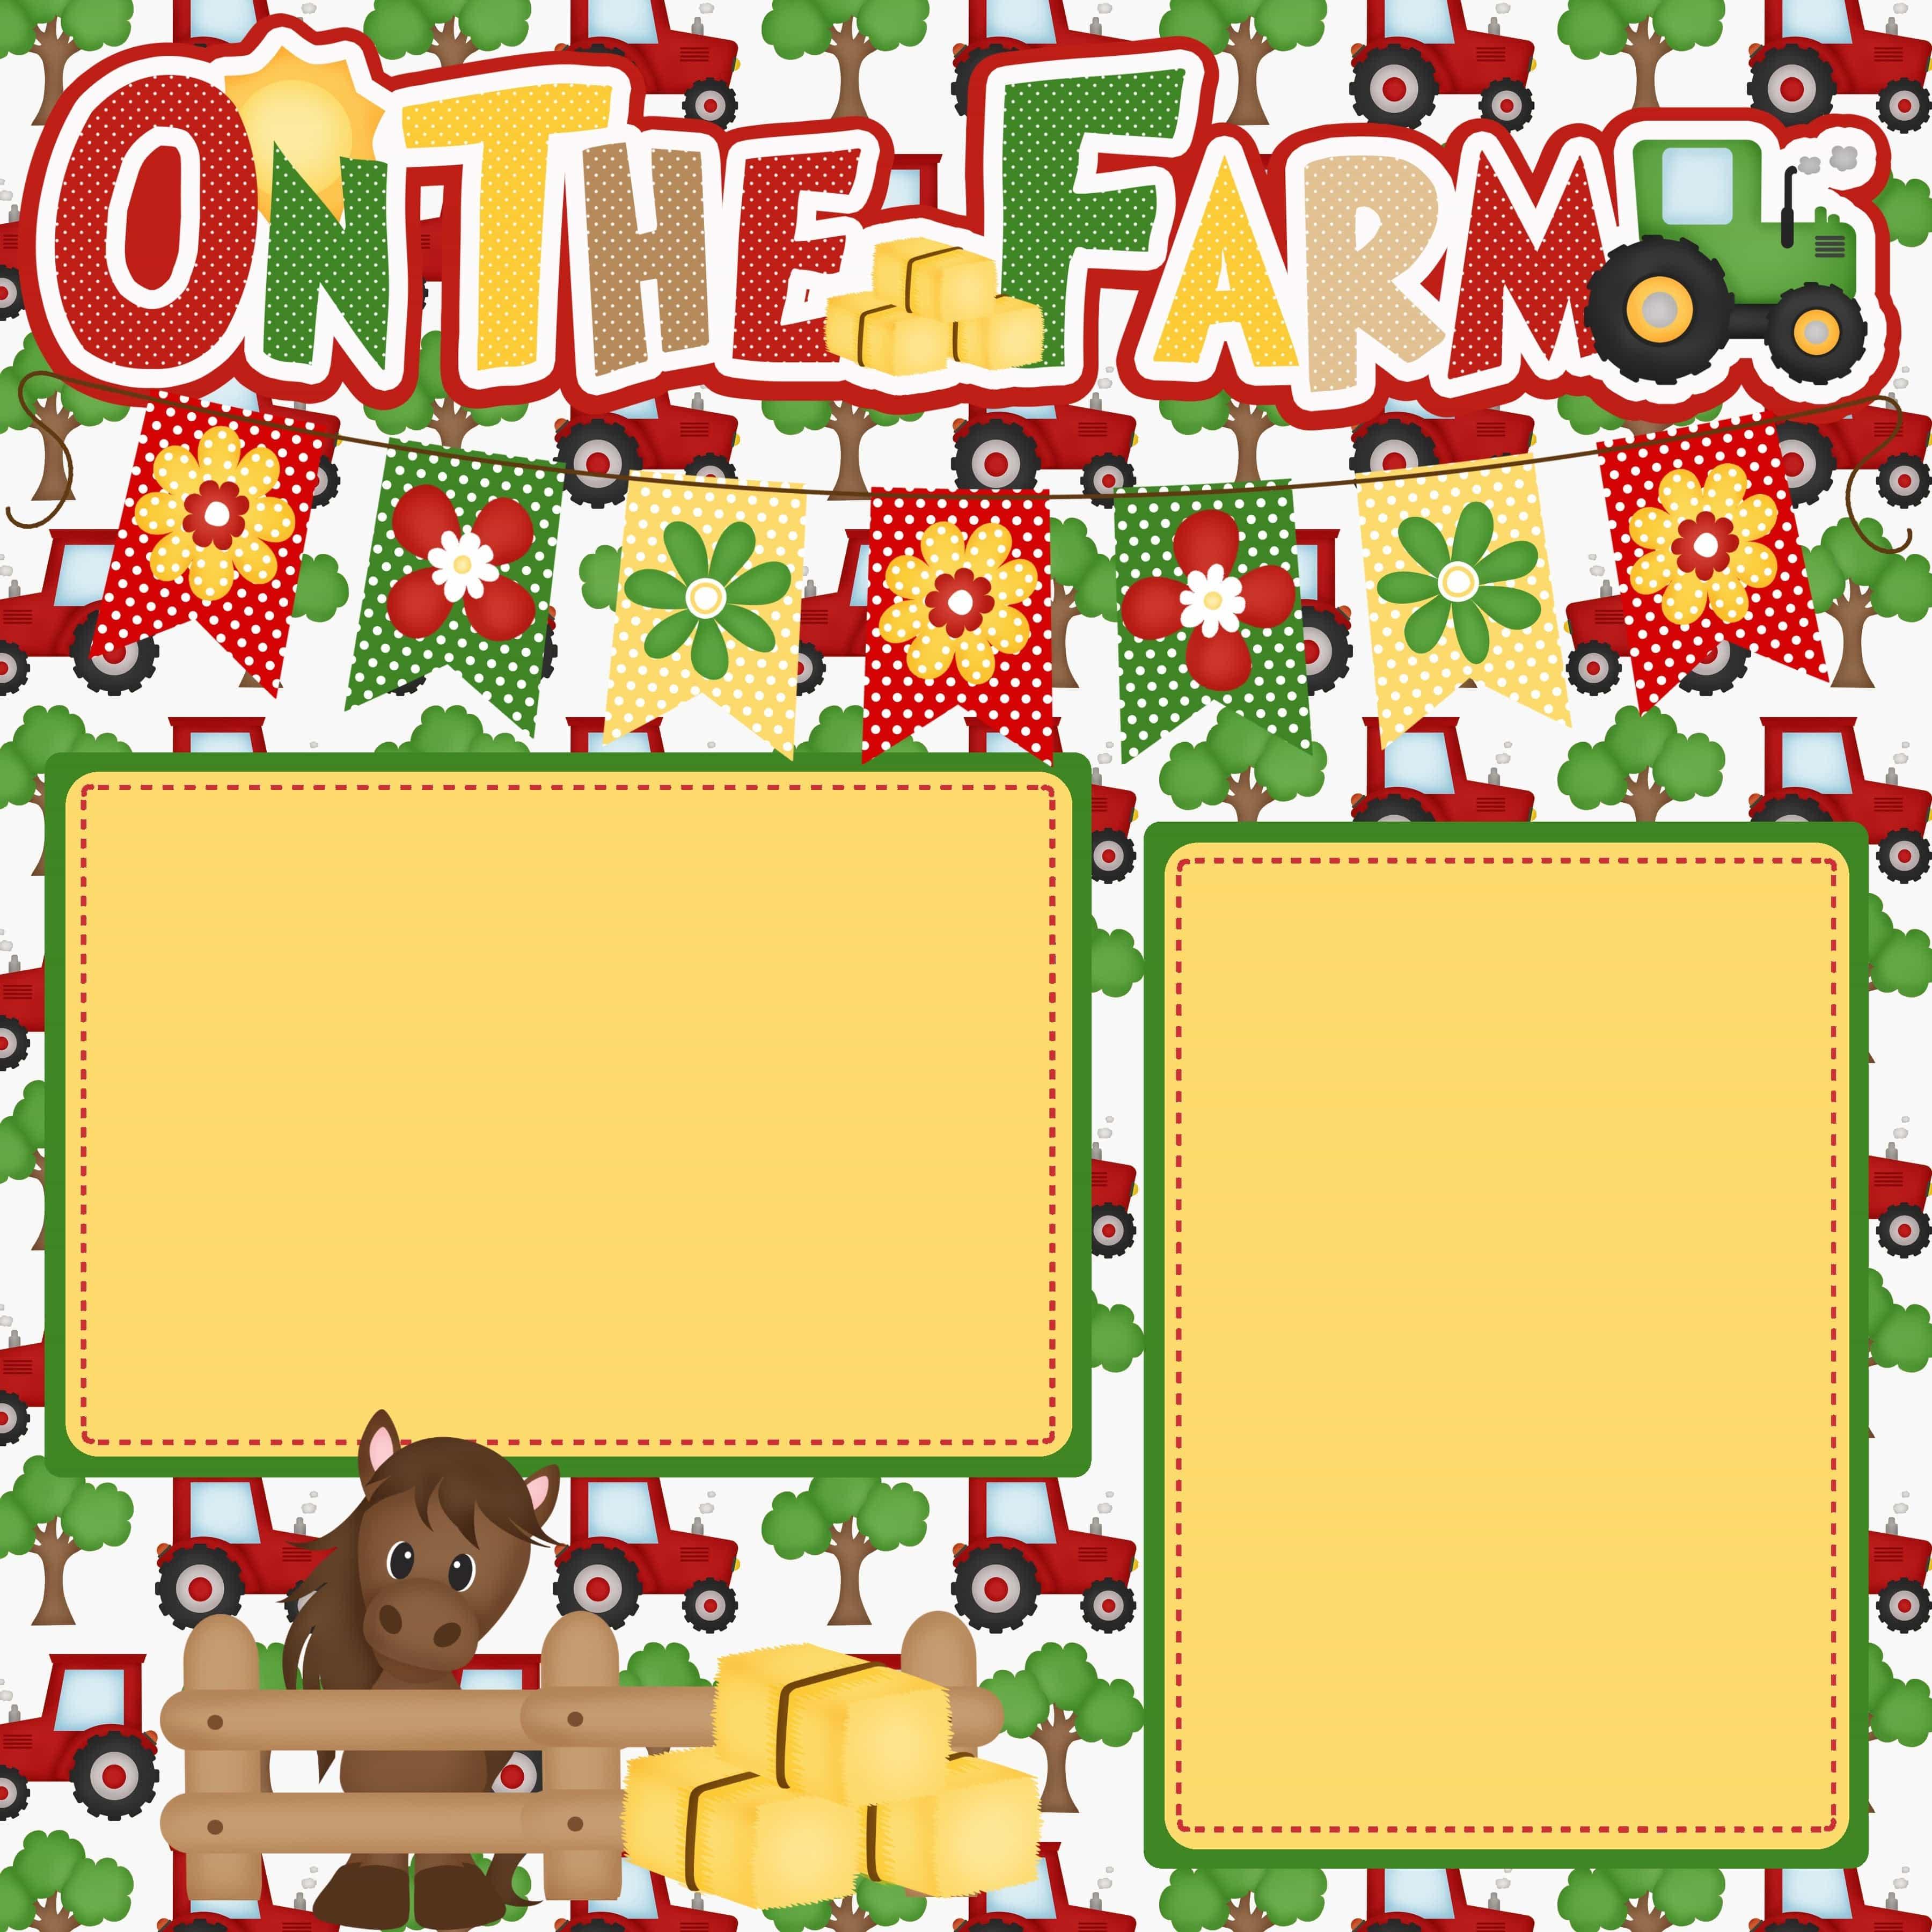 On the Farm (2) - 12 x 12 Premade, Printed Scrapbook Pages by SSC Designs - Scrapbook Supply Companies